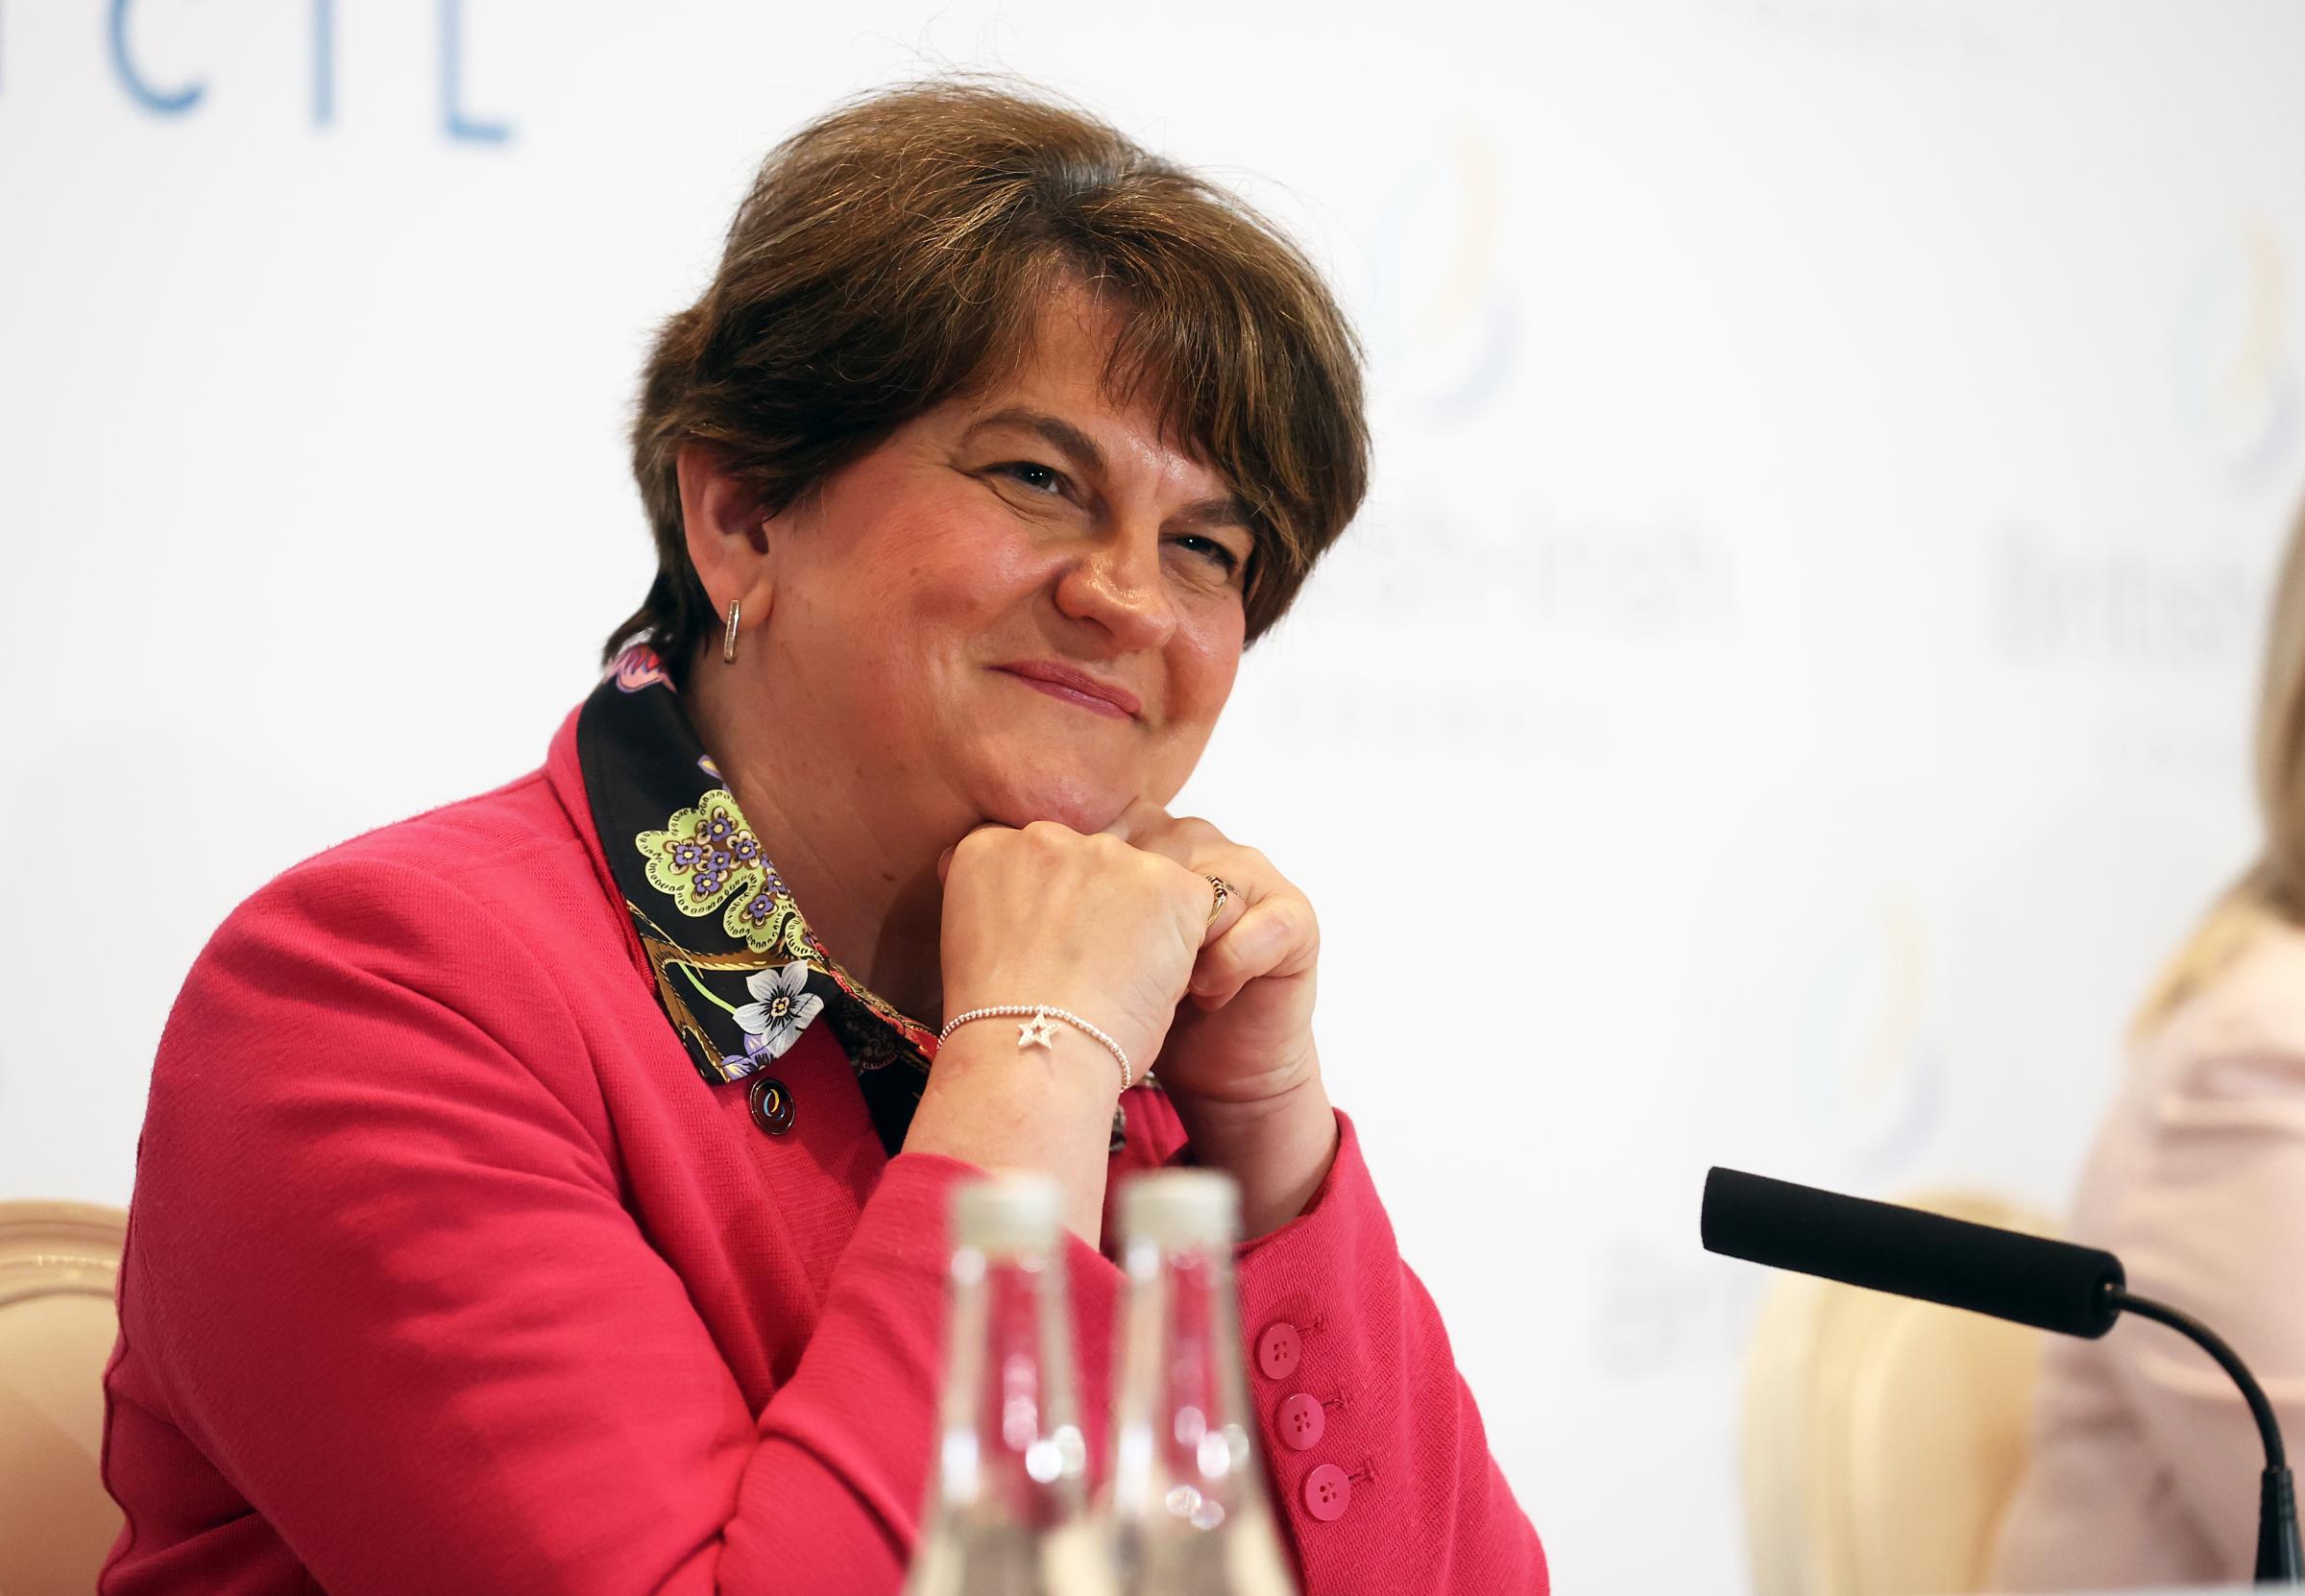 Arlene Foster: Process underway in Fermanagh South Tyrone to find successor